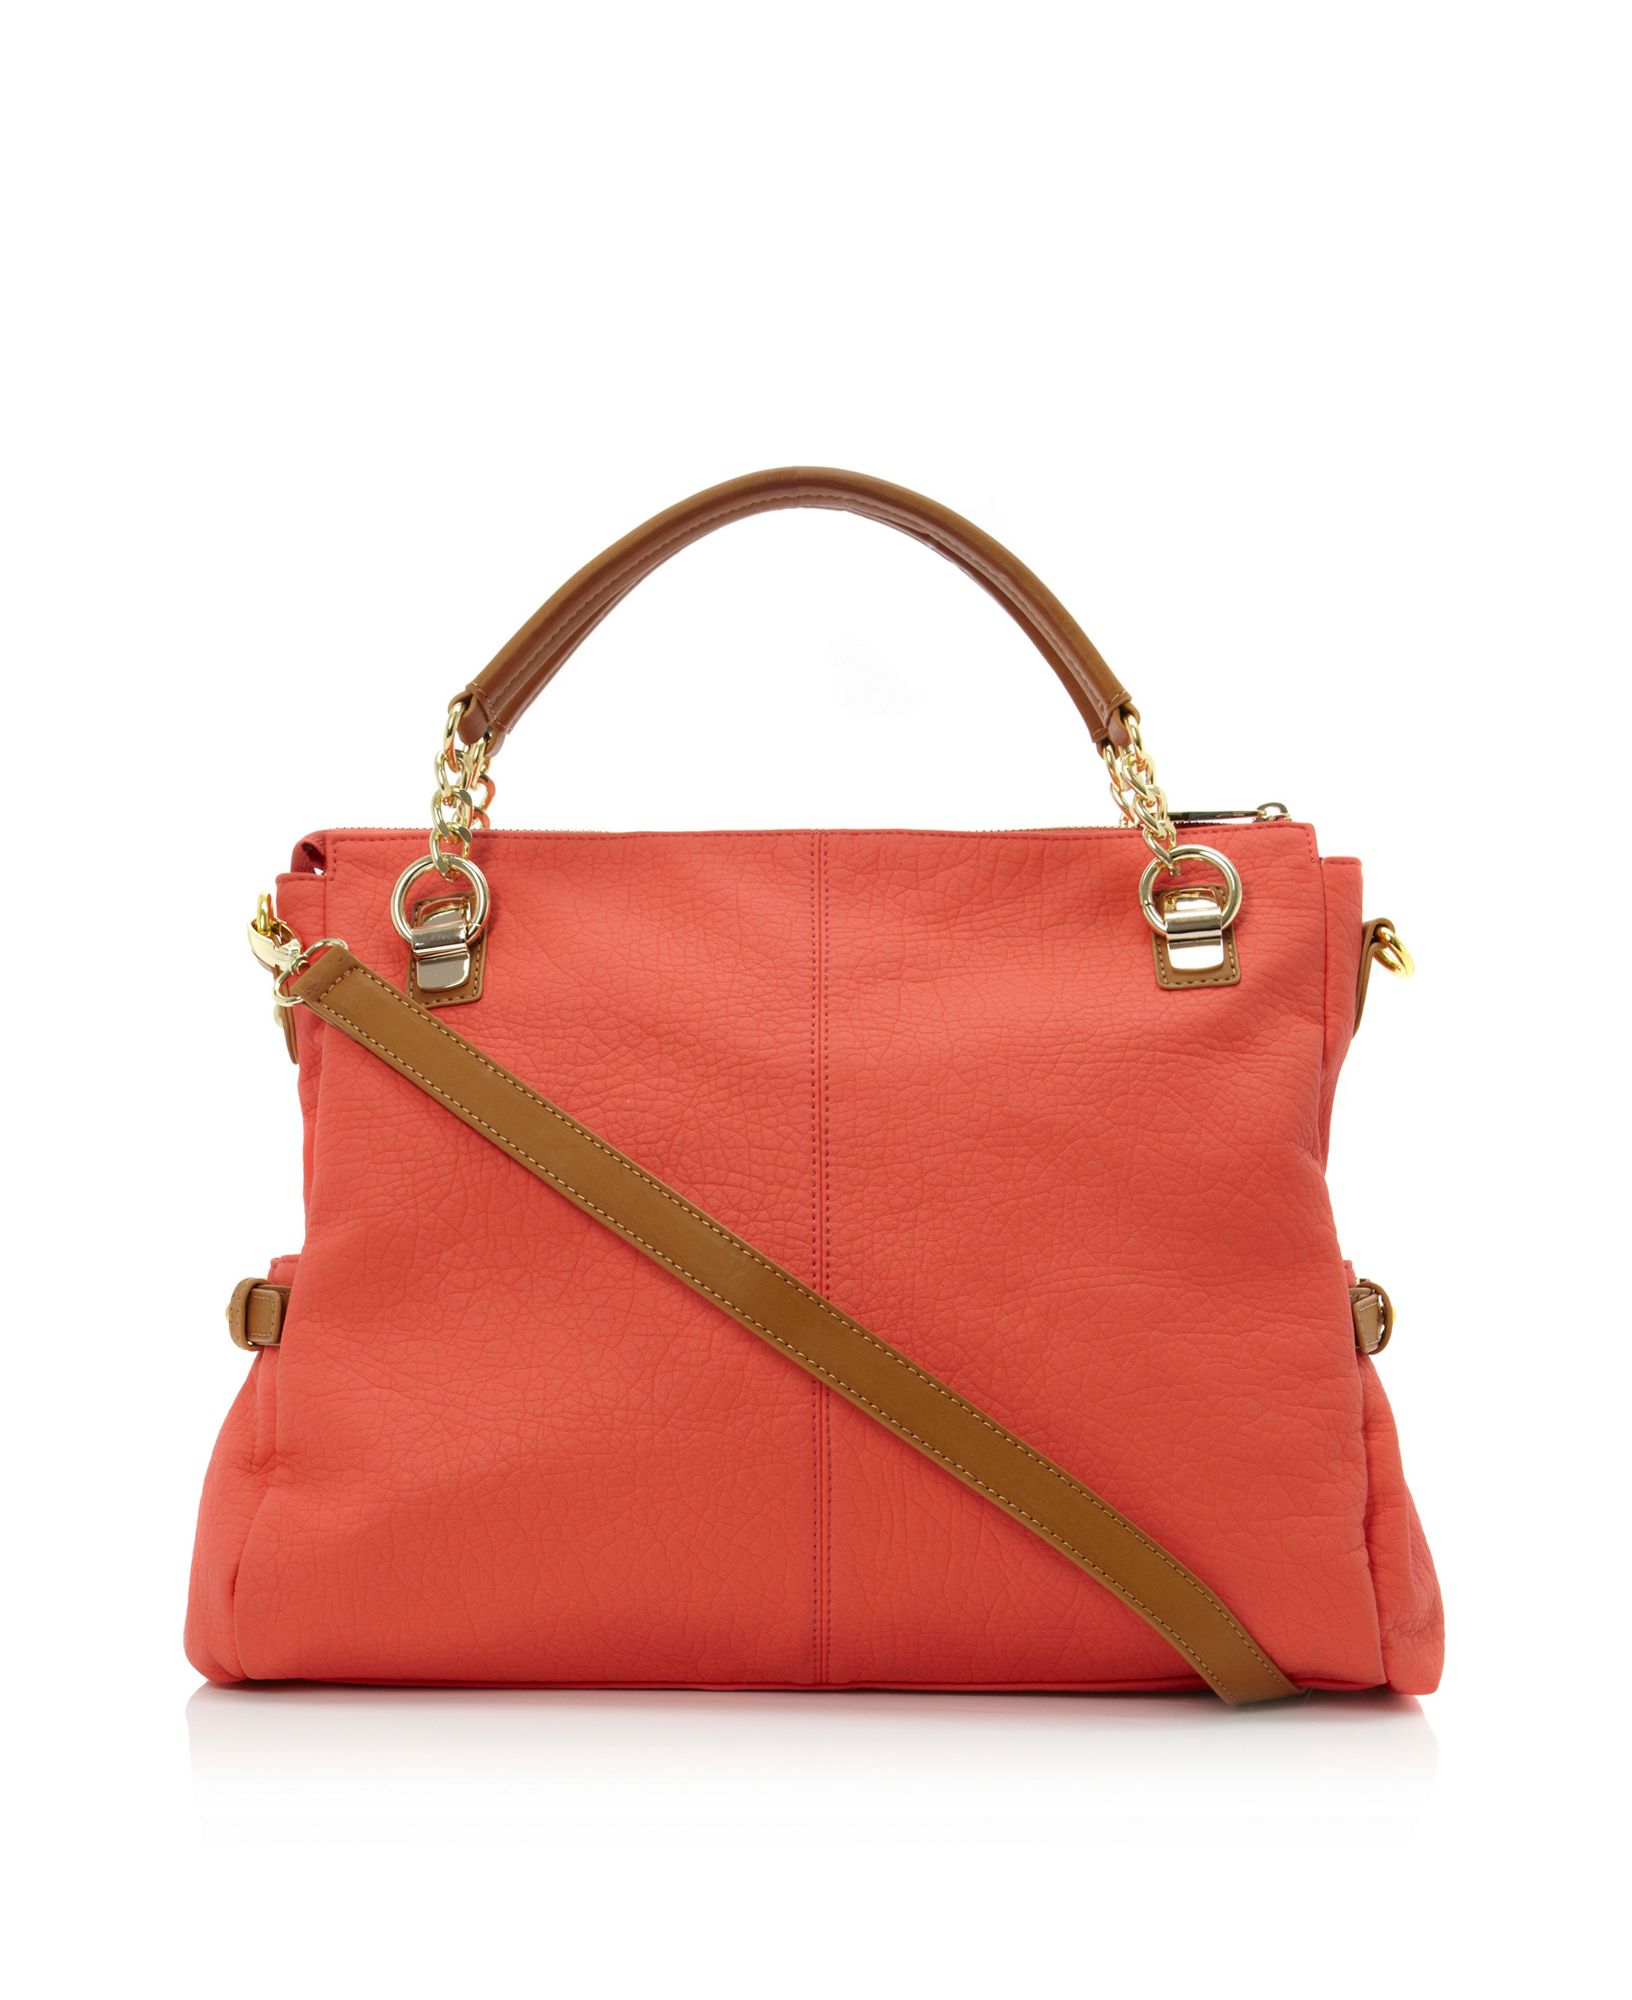 Steve Madden Bbixie Colour Block Shopper Bag in Red (coral) | Lyst